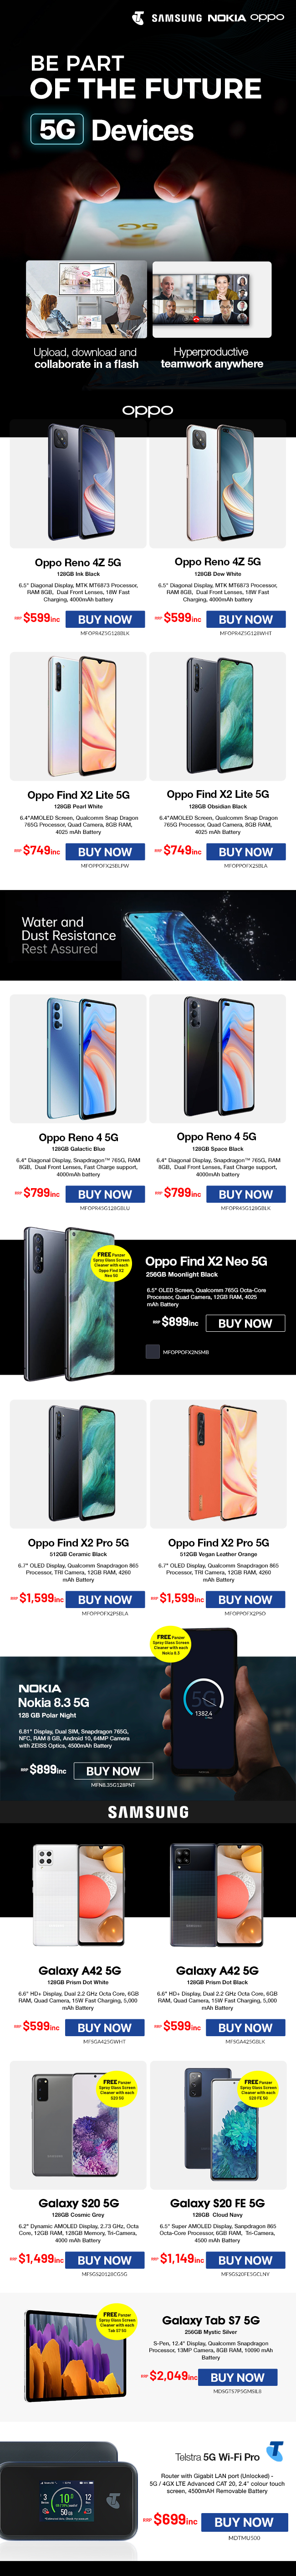 5G Devices Promotion